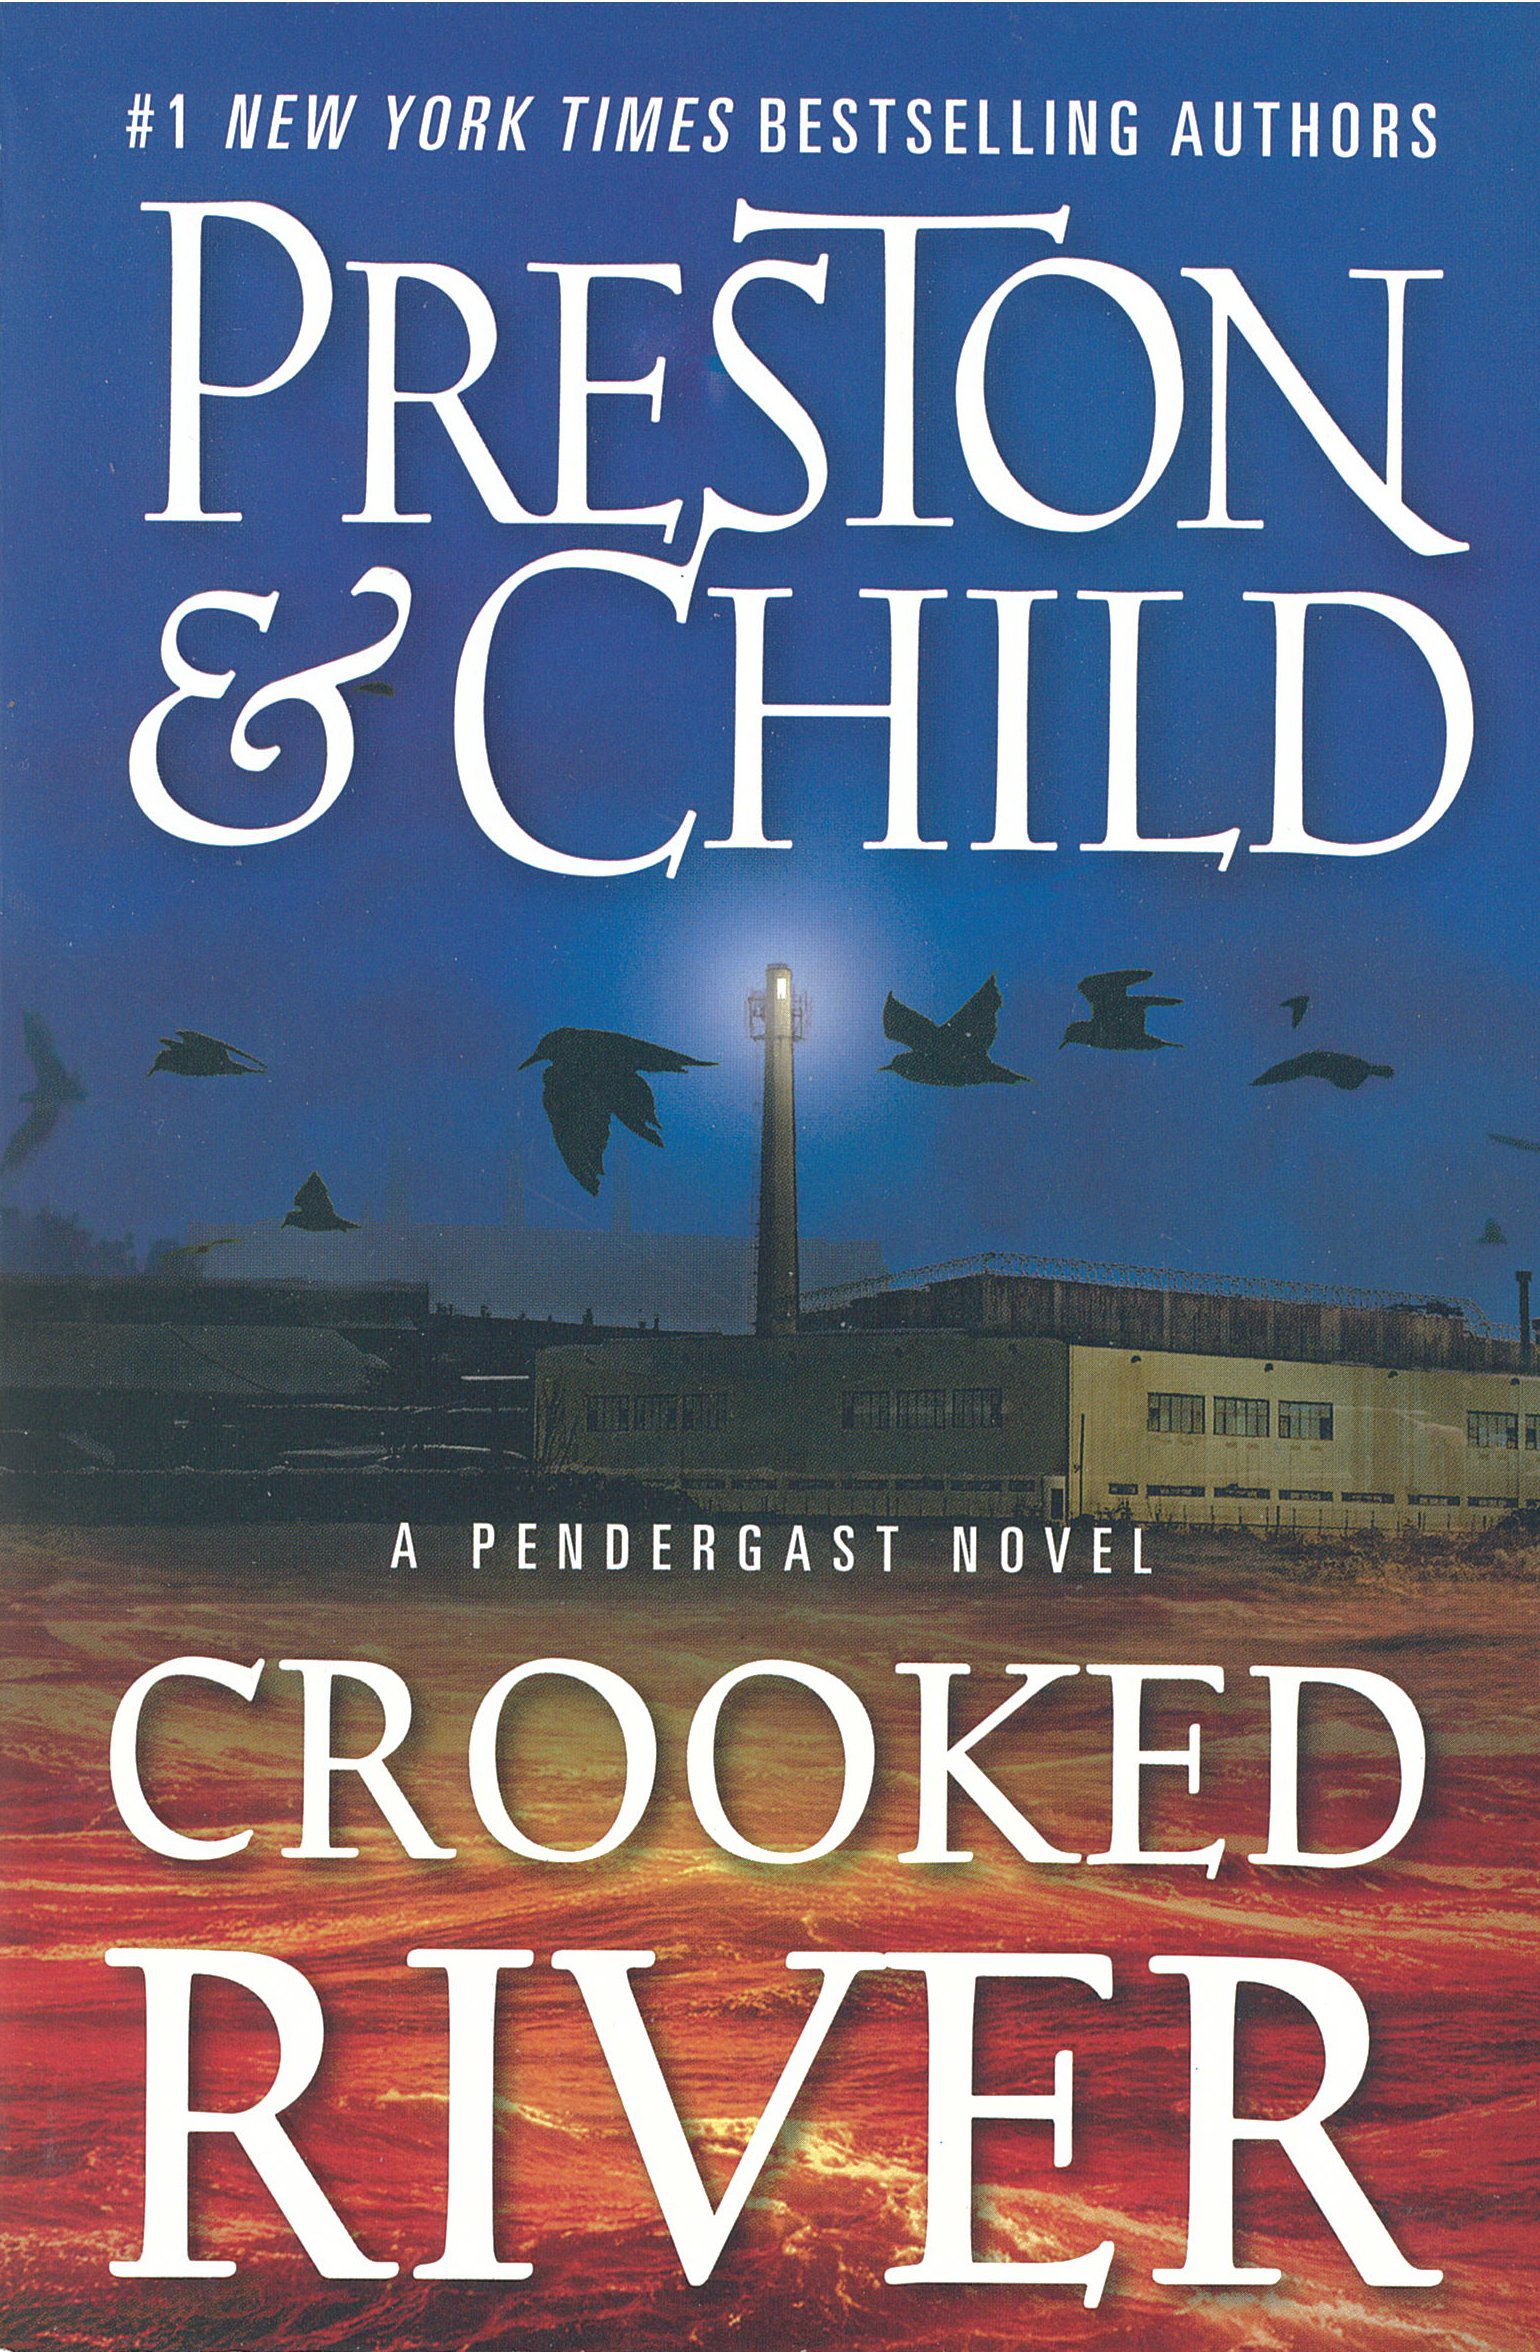 Crooked River book Review by Ron Fortier